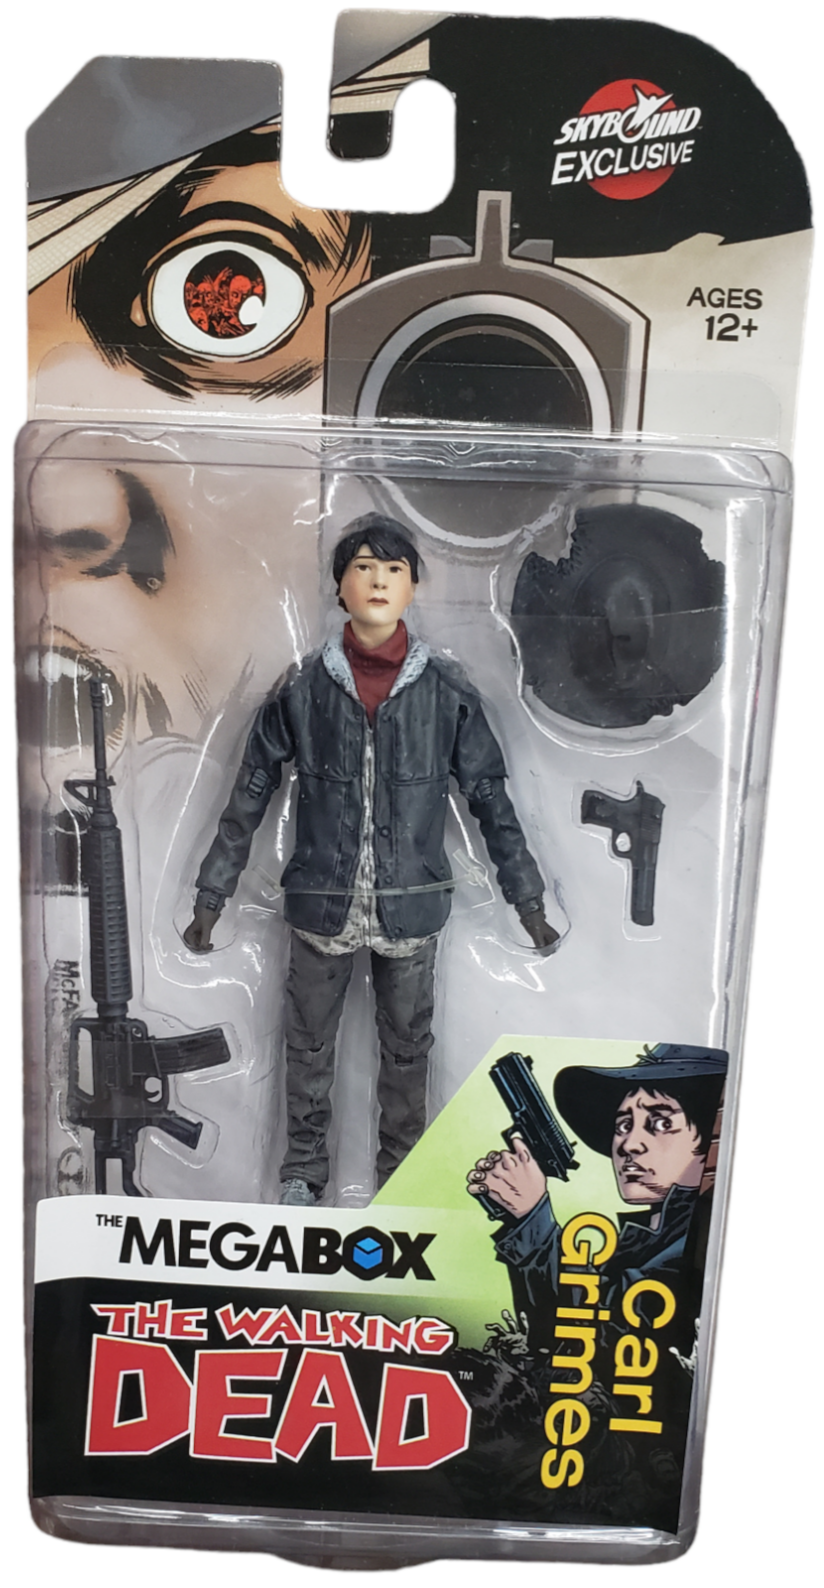 Skybound Exclusive The Megabox The Walking Dead- Carl Grimes Action Figure